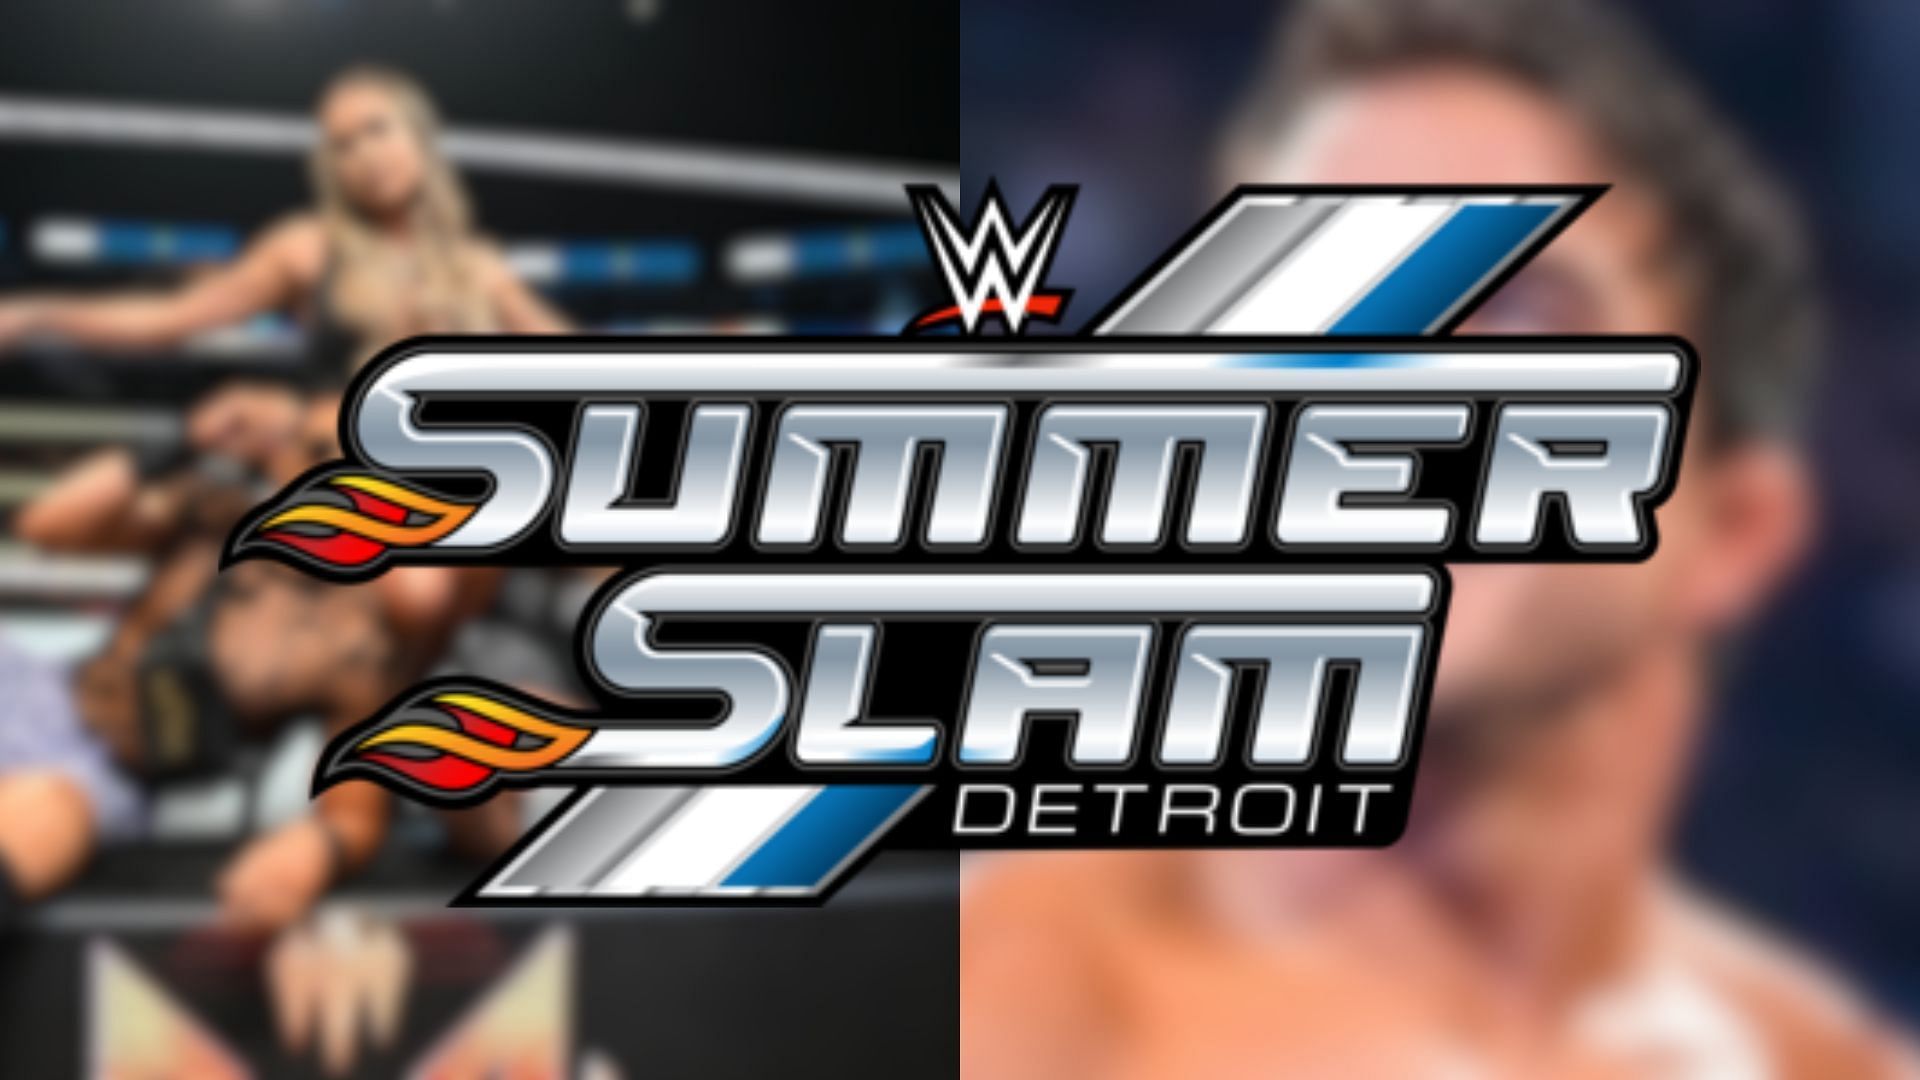 WWE Summerslam is scheduled to take place at Ford Field in Detroit, Michigan.